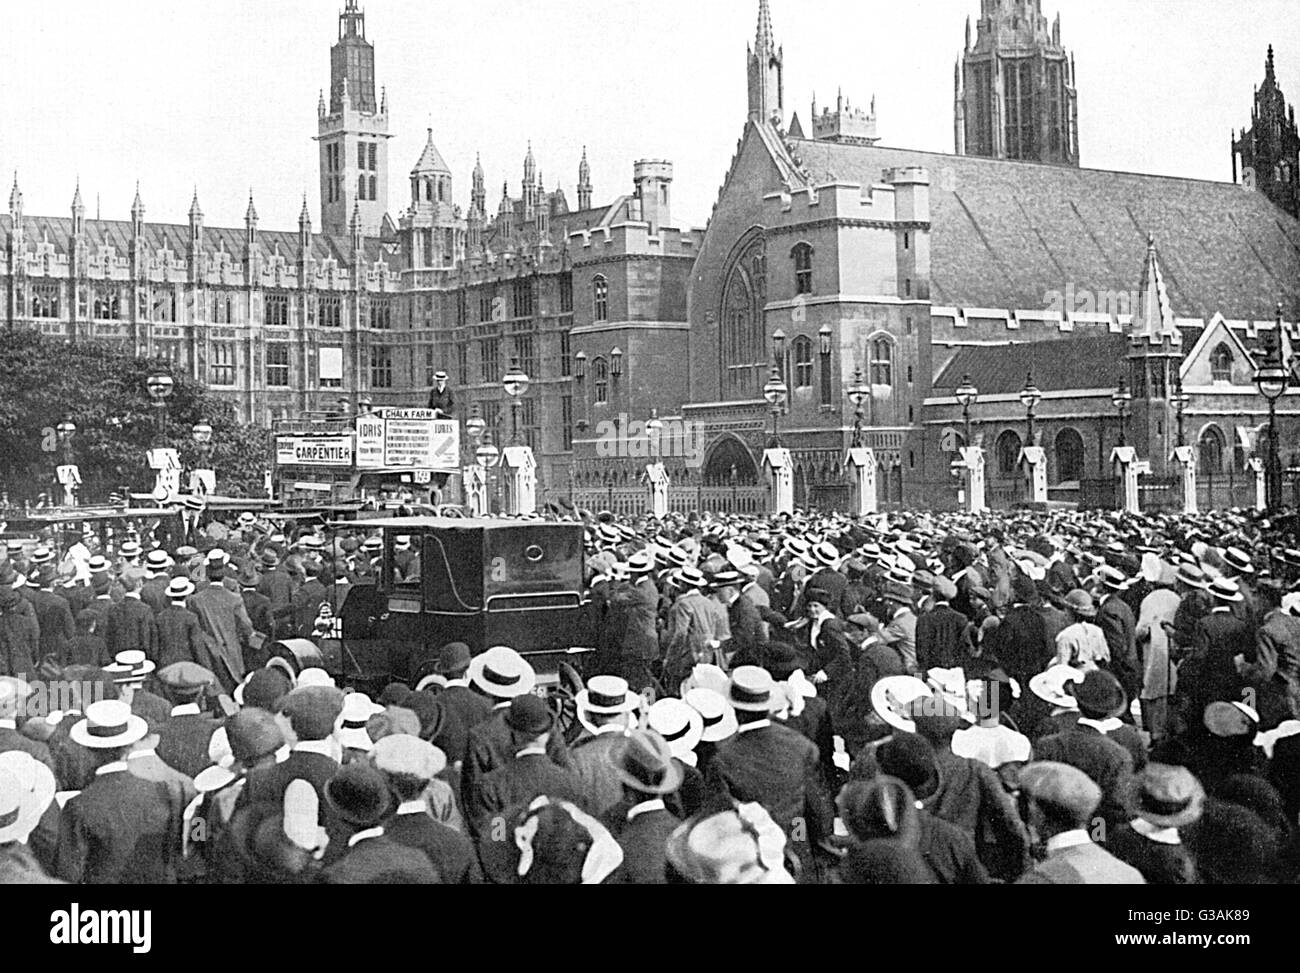 Crowds assemble close to the House of Commons in London, during the afternoon of the August Bank Holiday (3rd August 1914) when war was practically inevitable.     Date: 1914 Stock Photo